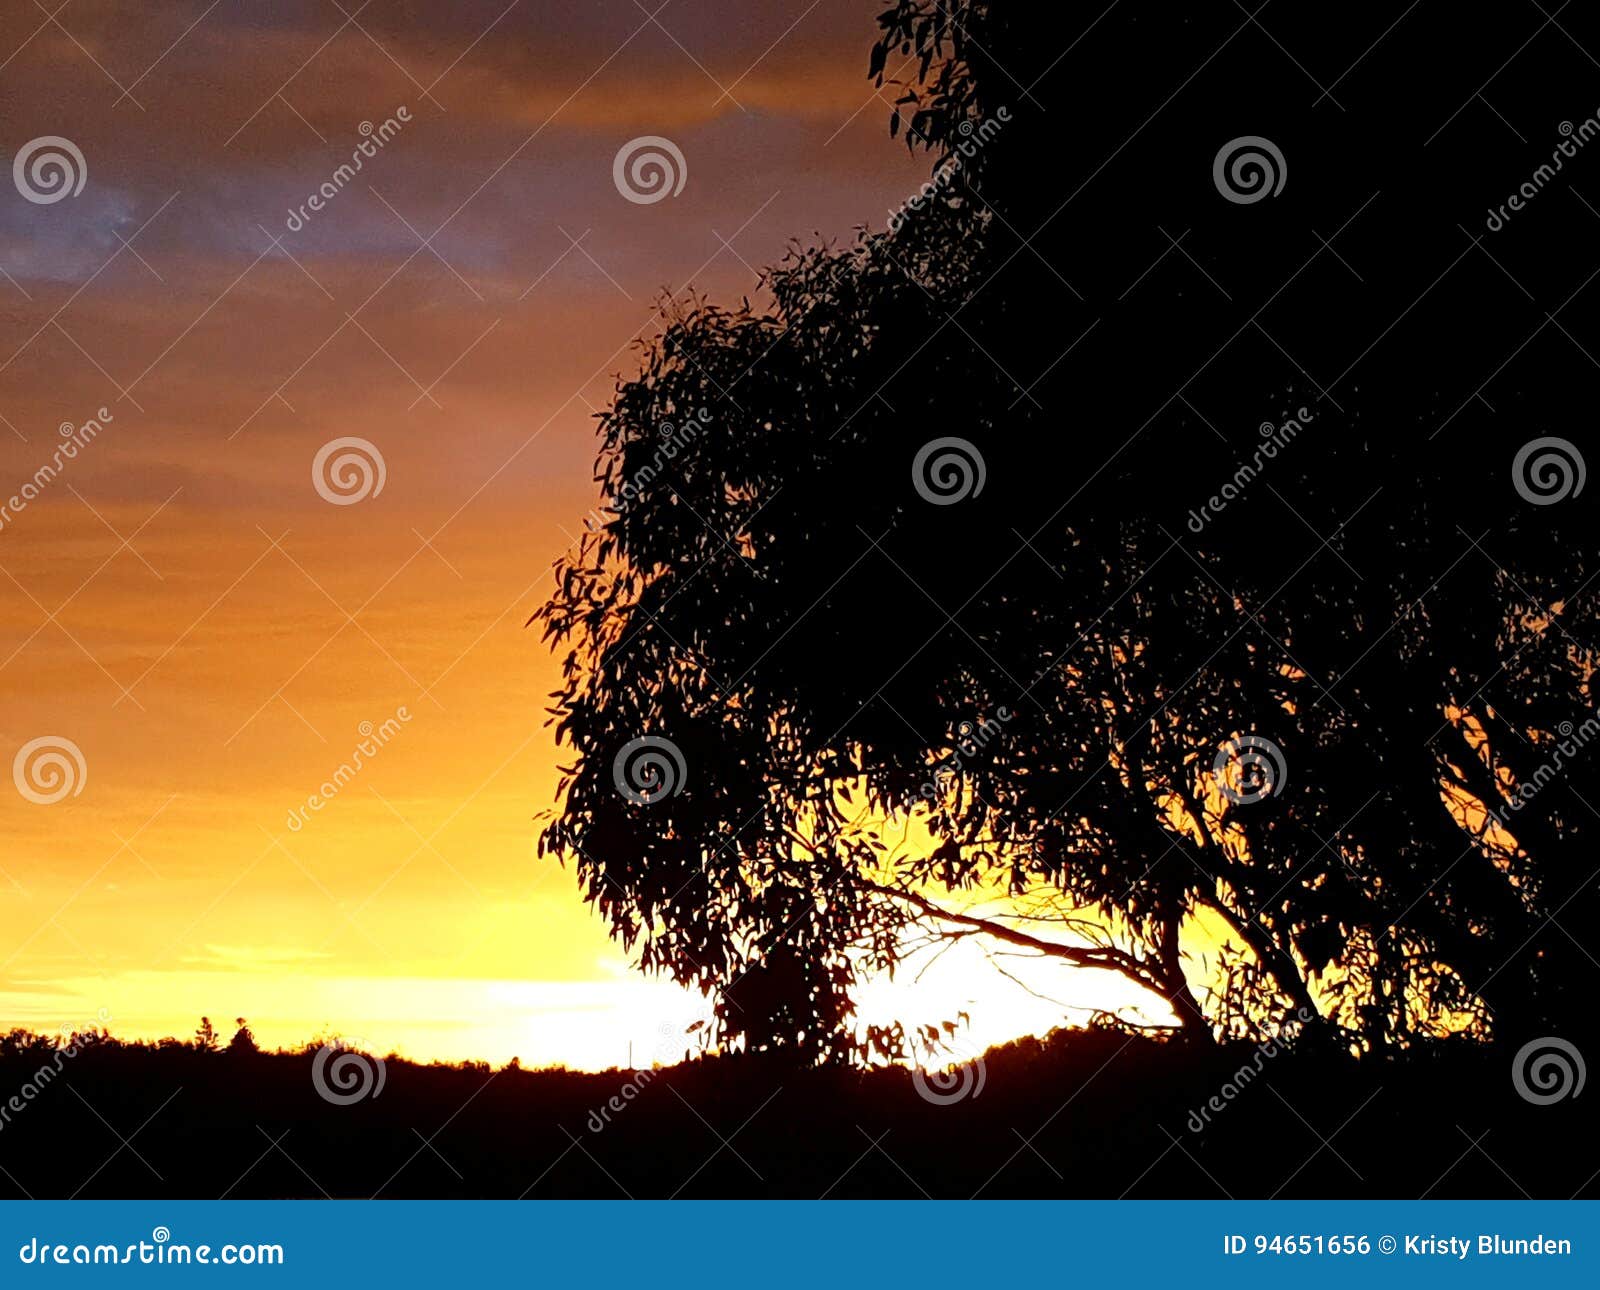 Stormy Sunset through the Silhouette of a Tree Stock Photo - Image of